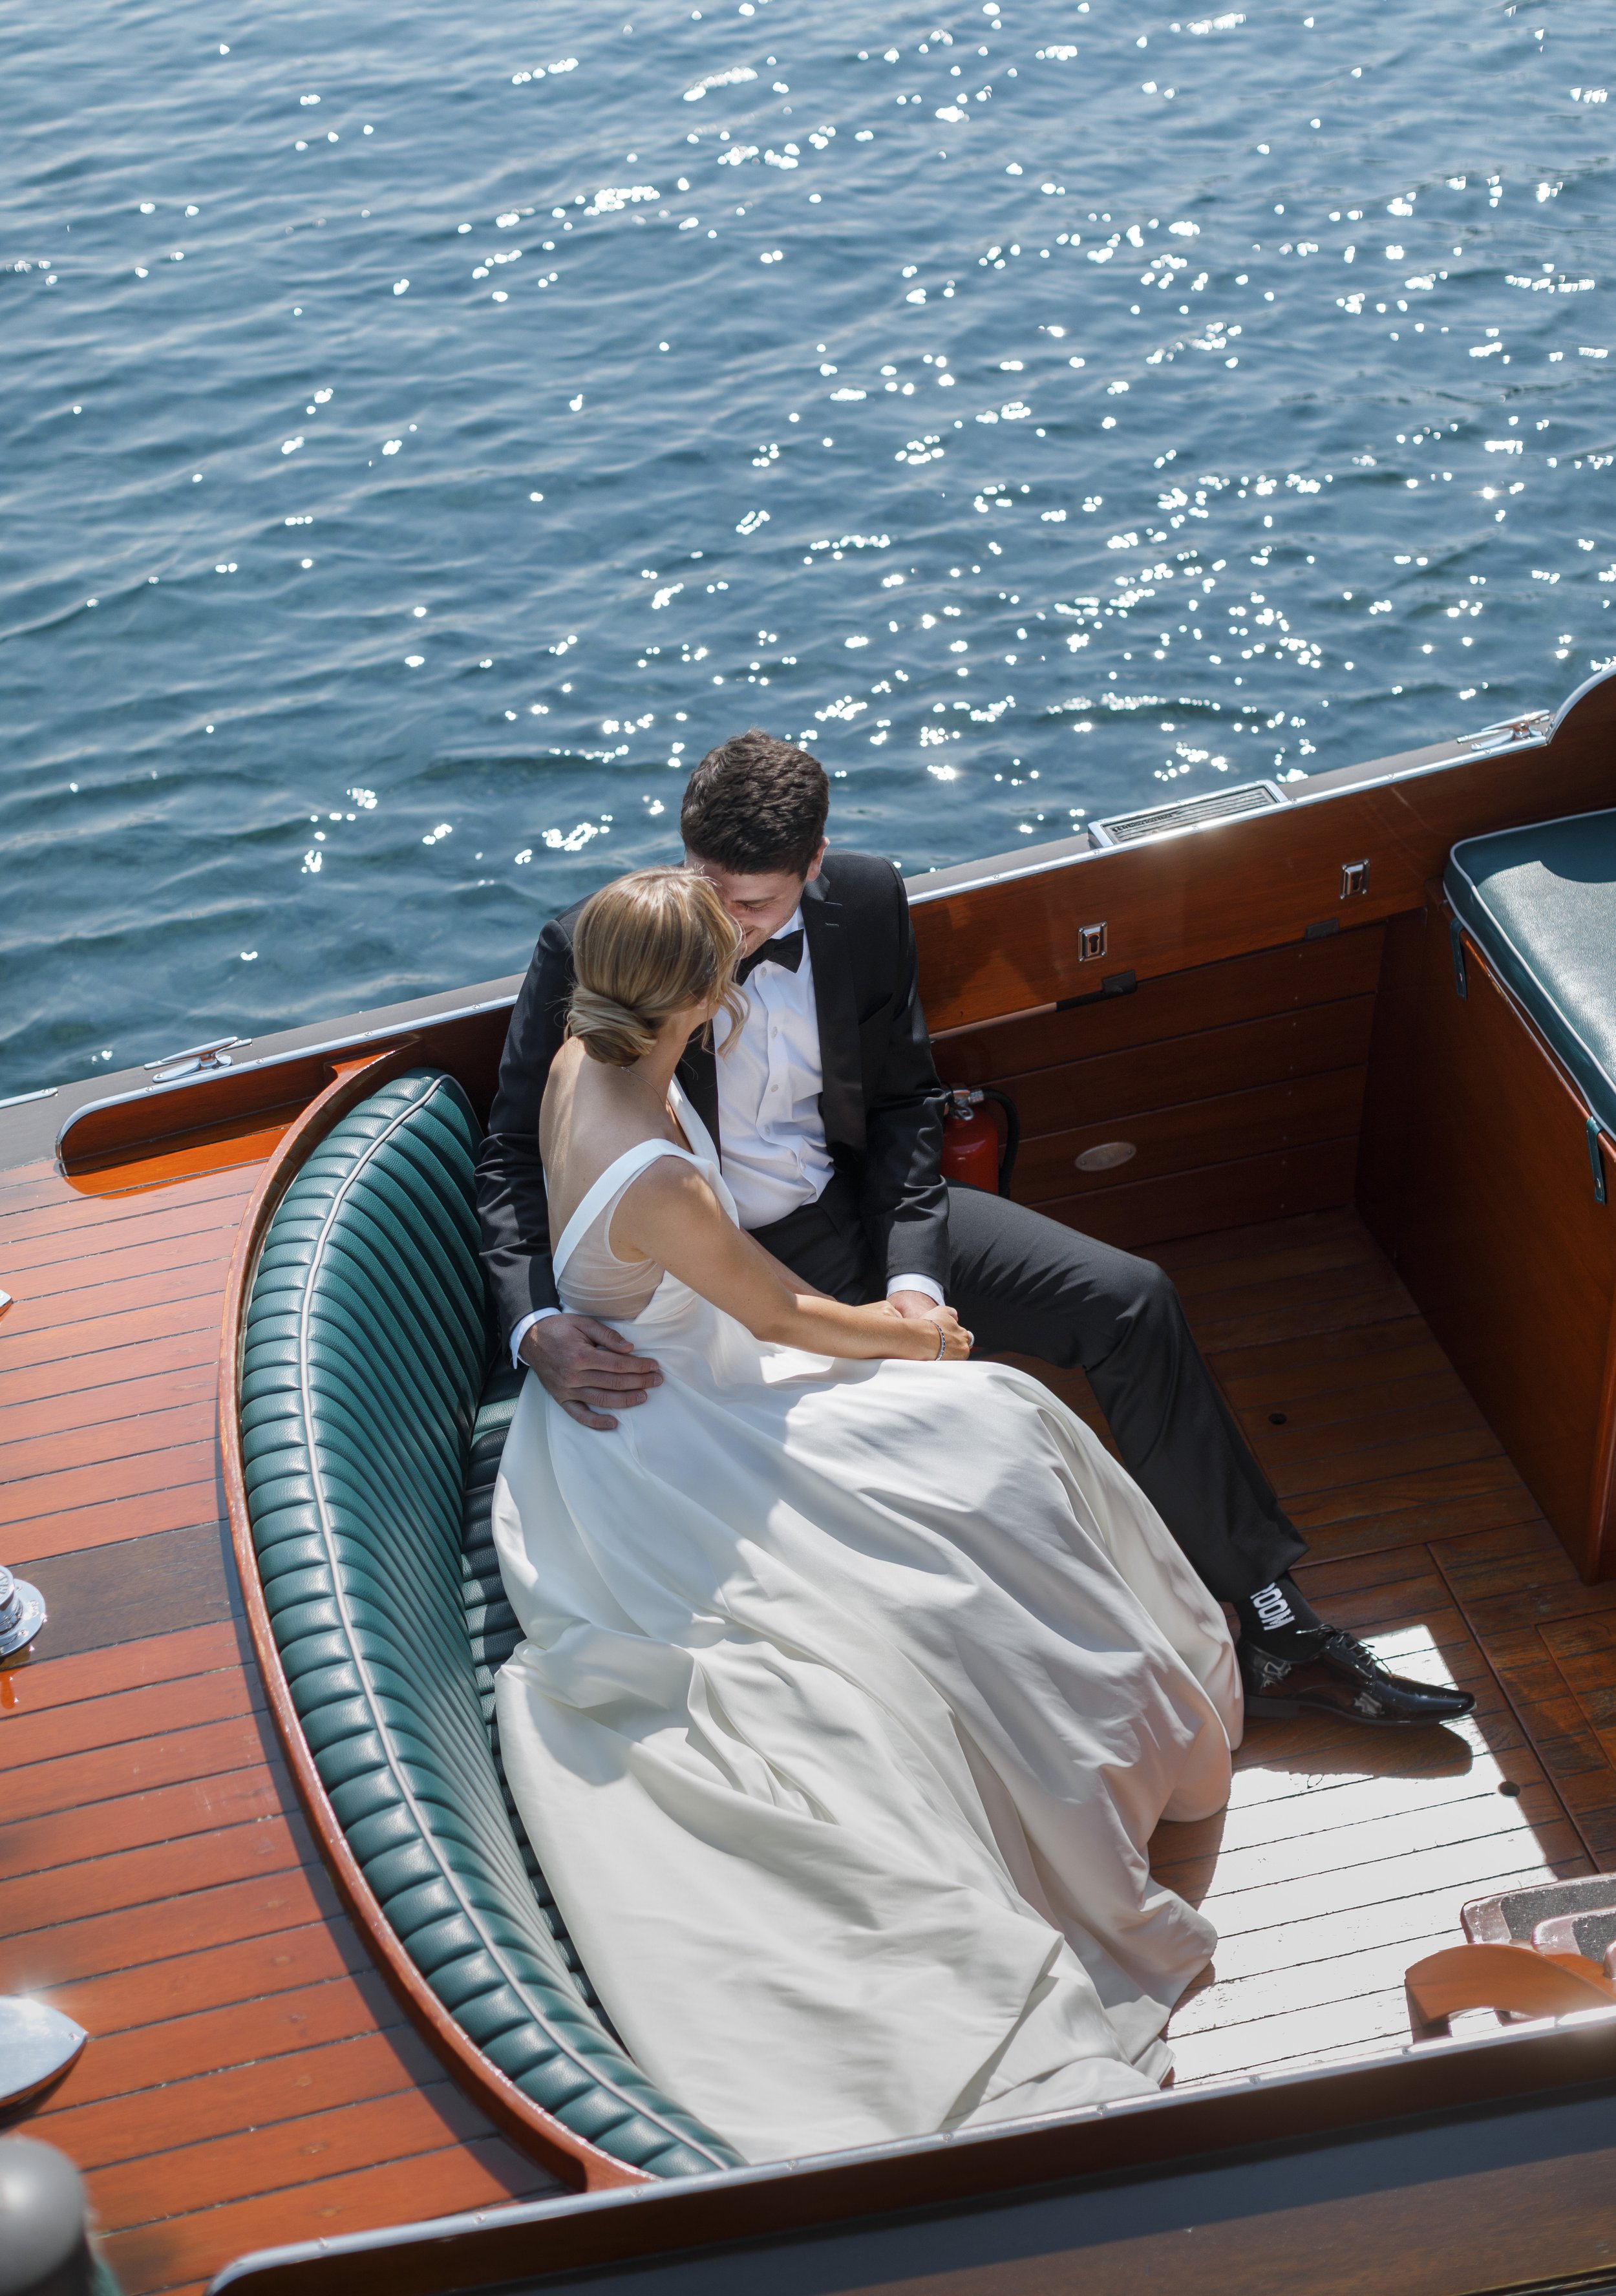  Bride and groom snuggle together while riding on a boat captured by Savanna Richardson Photography. bride and groom boat pictures water weddings #savannarichardsonphotography #tahoewedding #lakesidewedding #outdoorwedding #summerwedding #laketahoe 